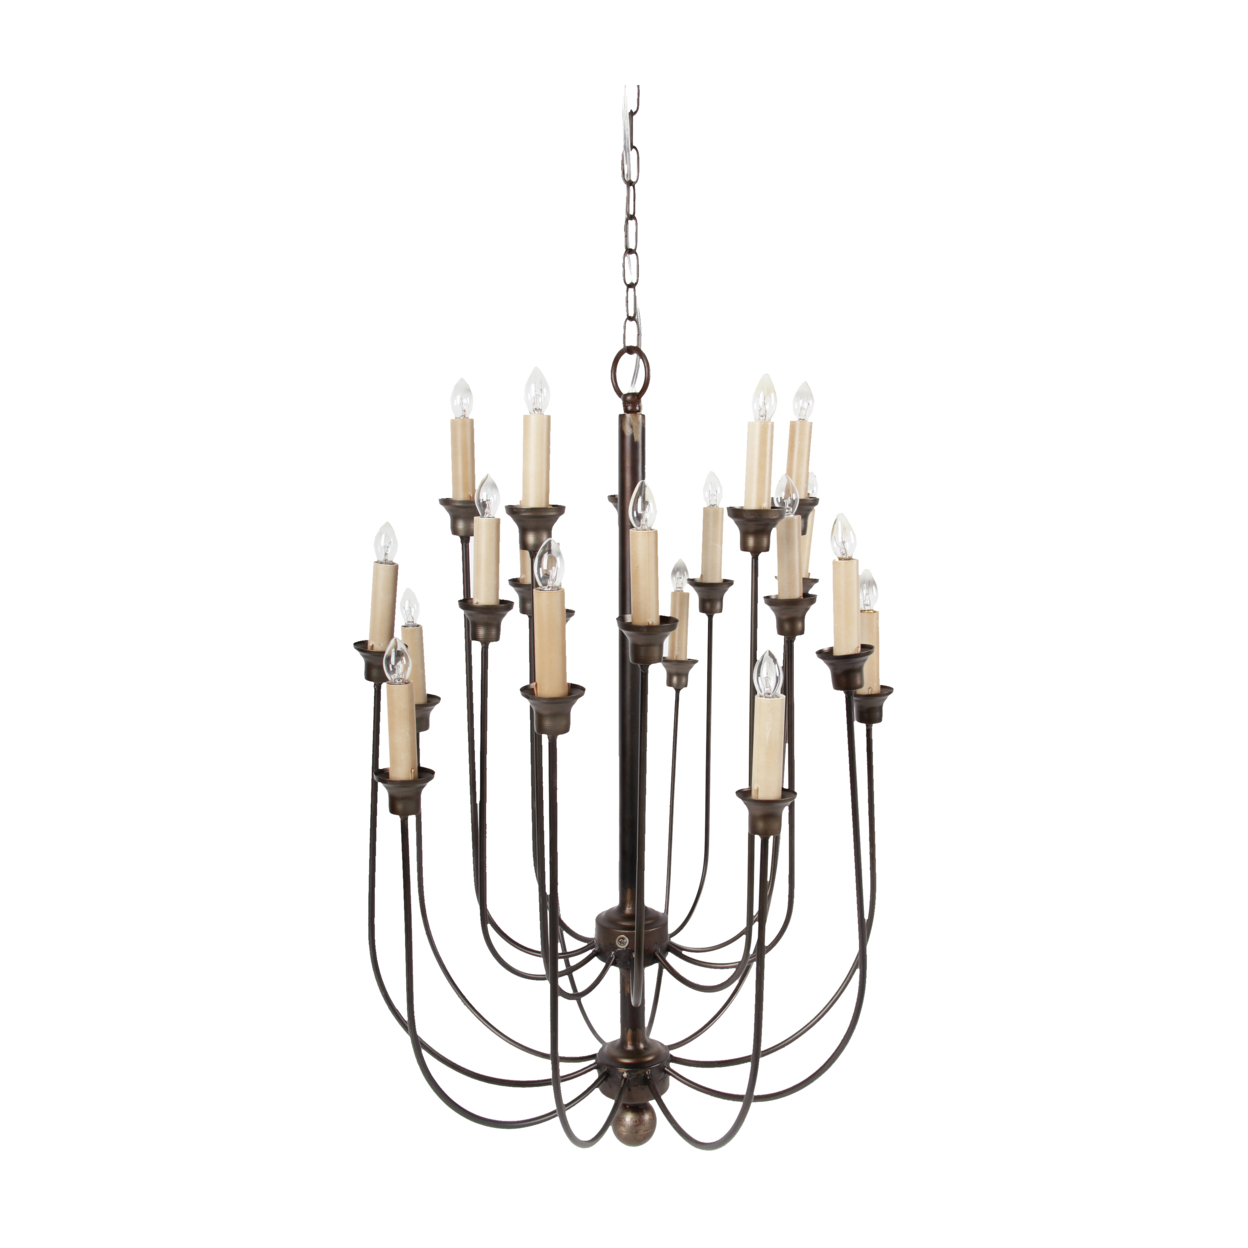 Traditional Decorative Metal Chandelier With Multiple Candles, Bronze And Cream- Saltoro Sherpi